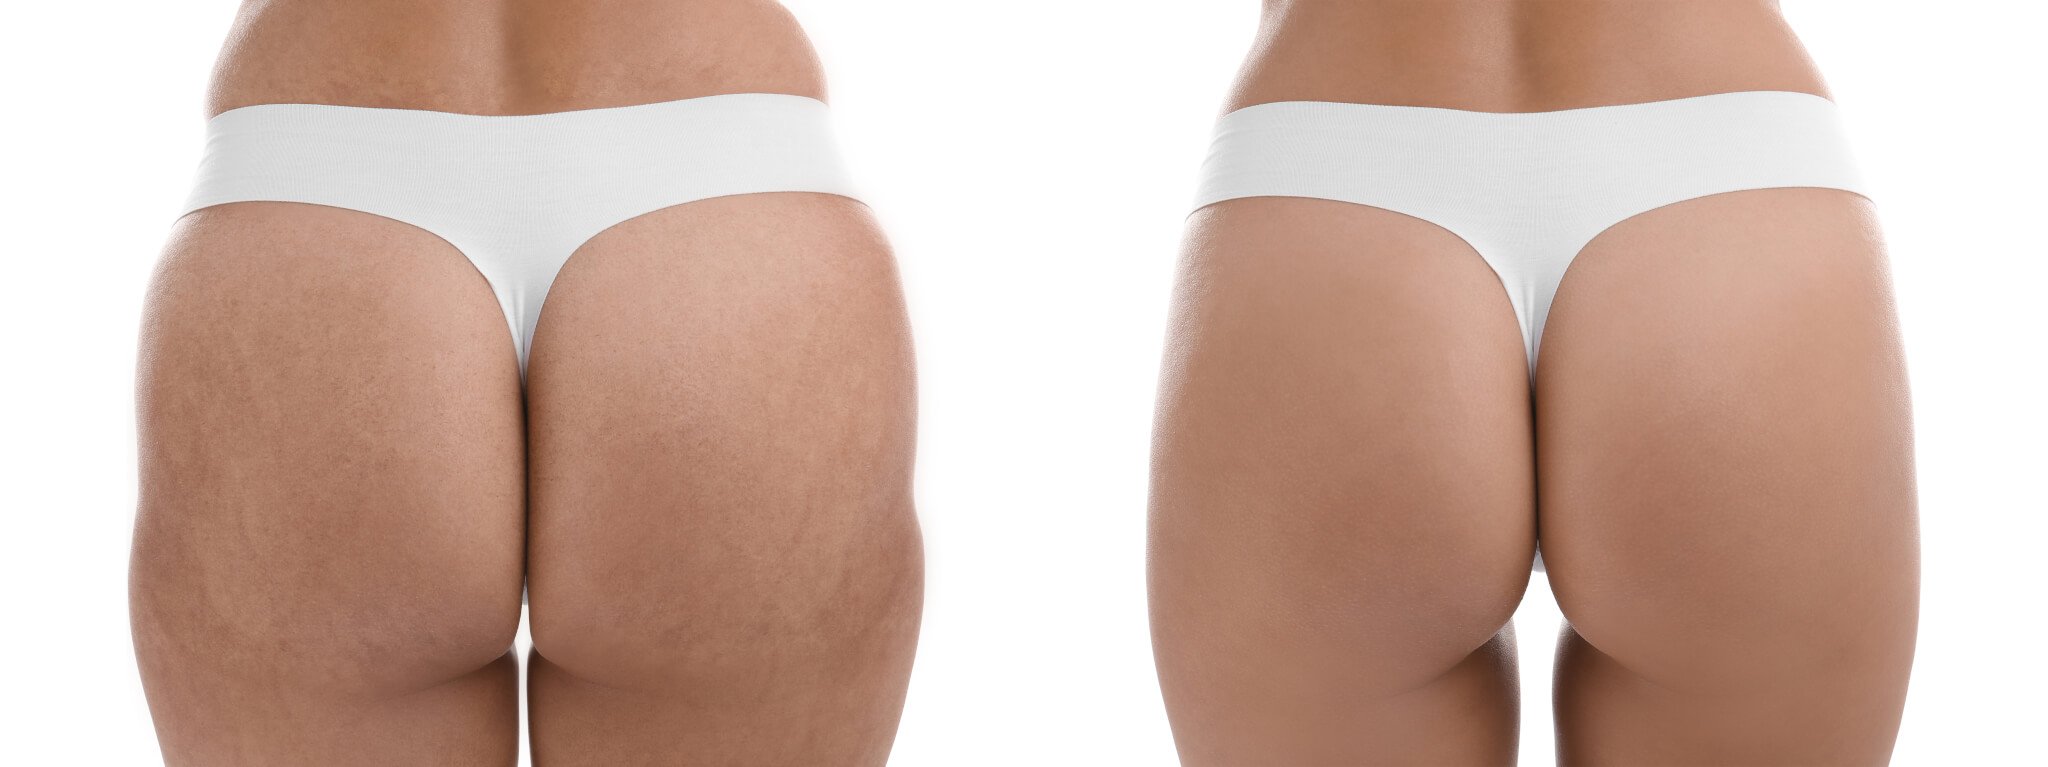 Best Cosmetic Procedures for Removing Cellulite2